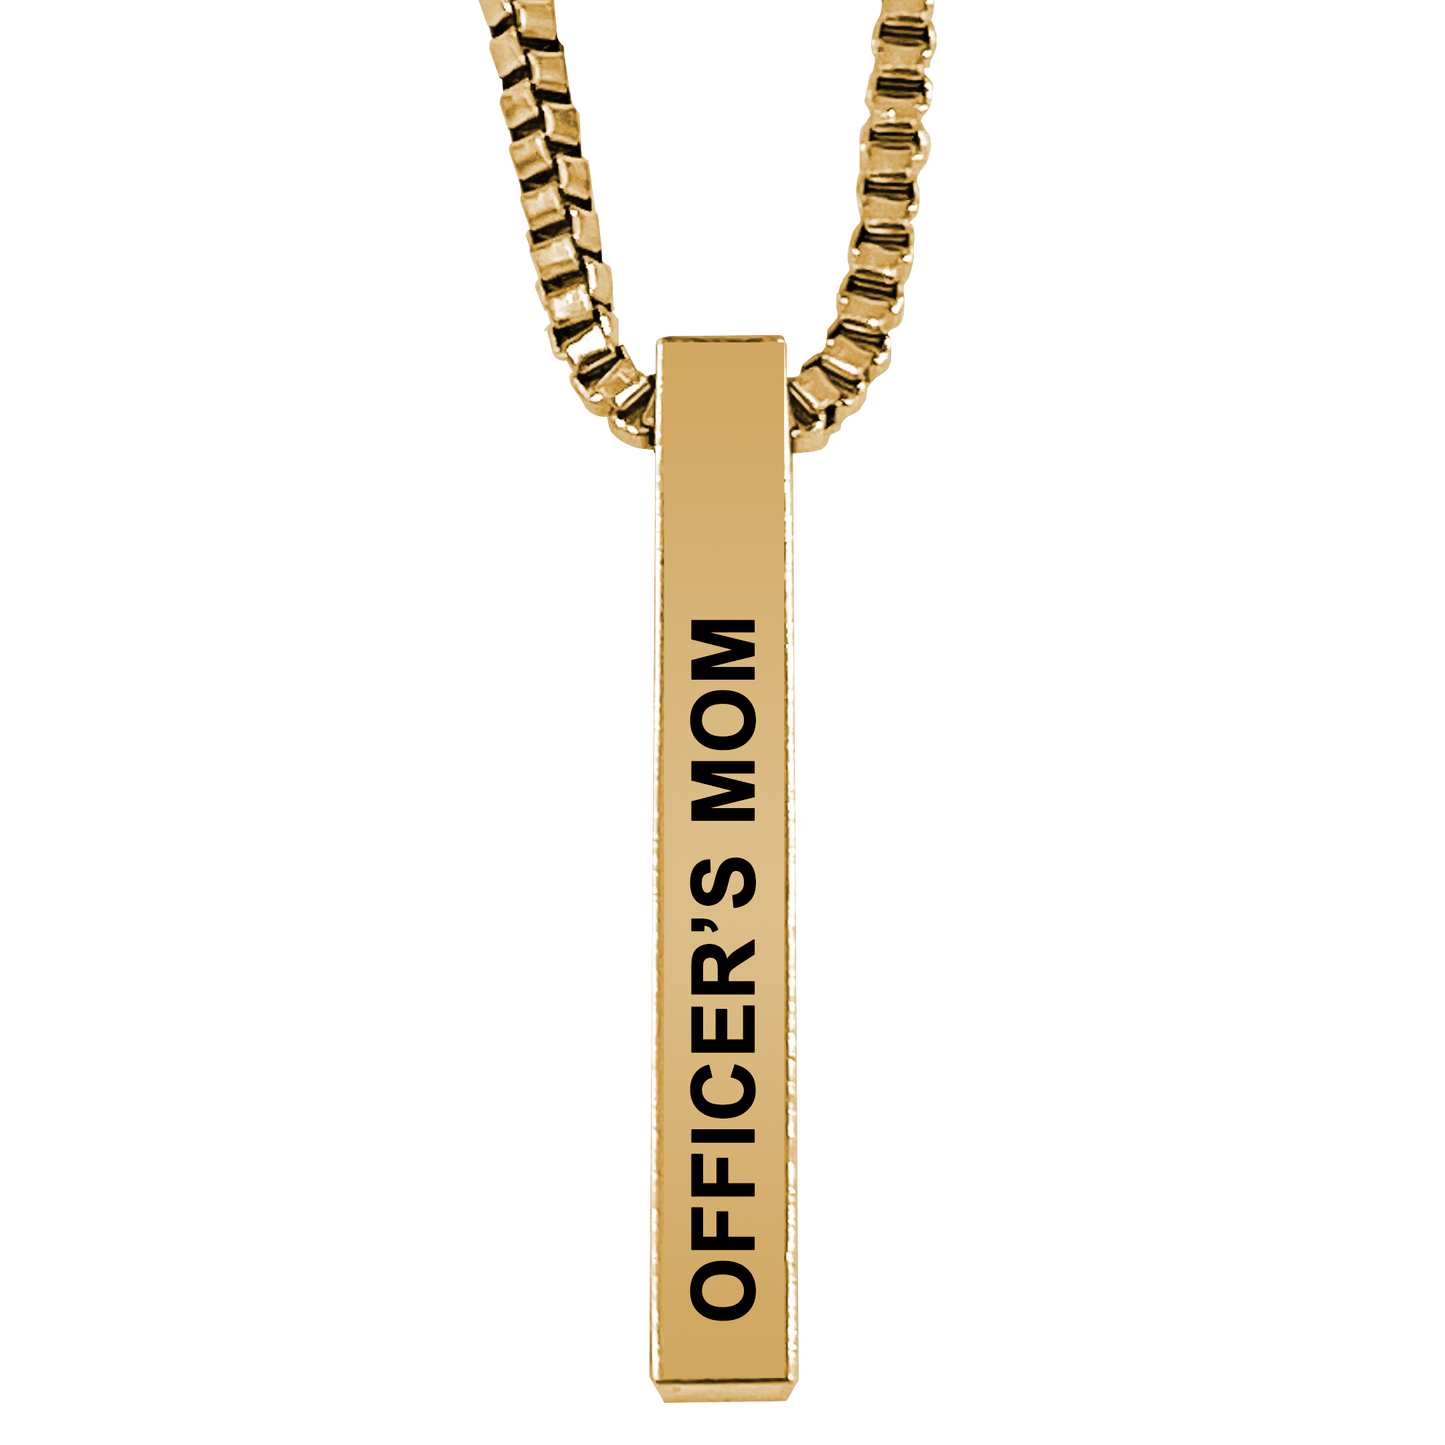 Officer's Mom Gold Plated Pillar Bar Pendant Necklace Gift Mother's Day Christmas Holiday Anniversary Police Sheriff Officer First Responder Law Enforcement